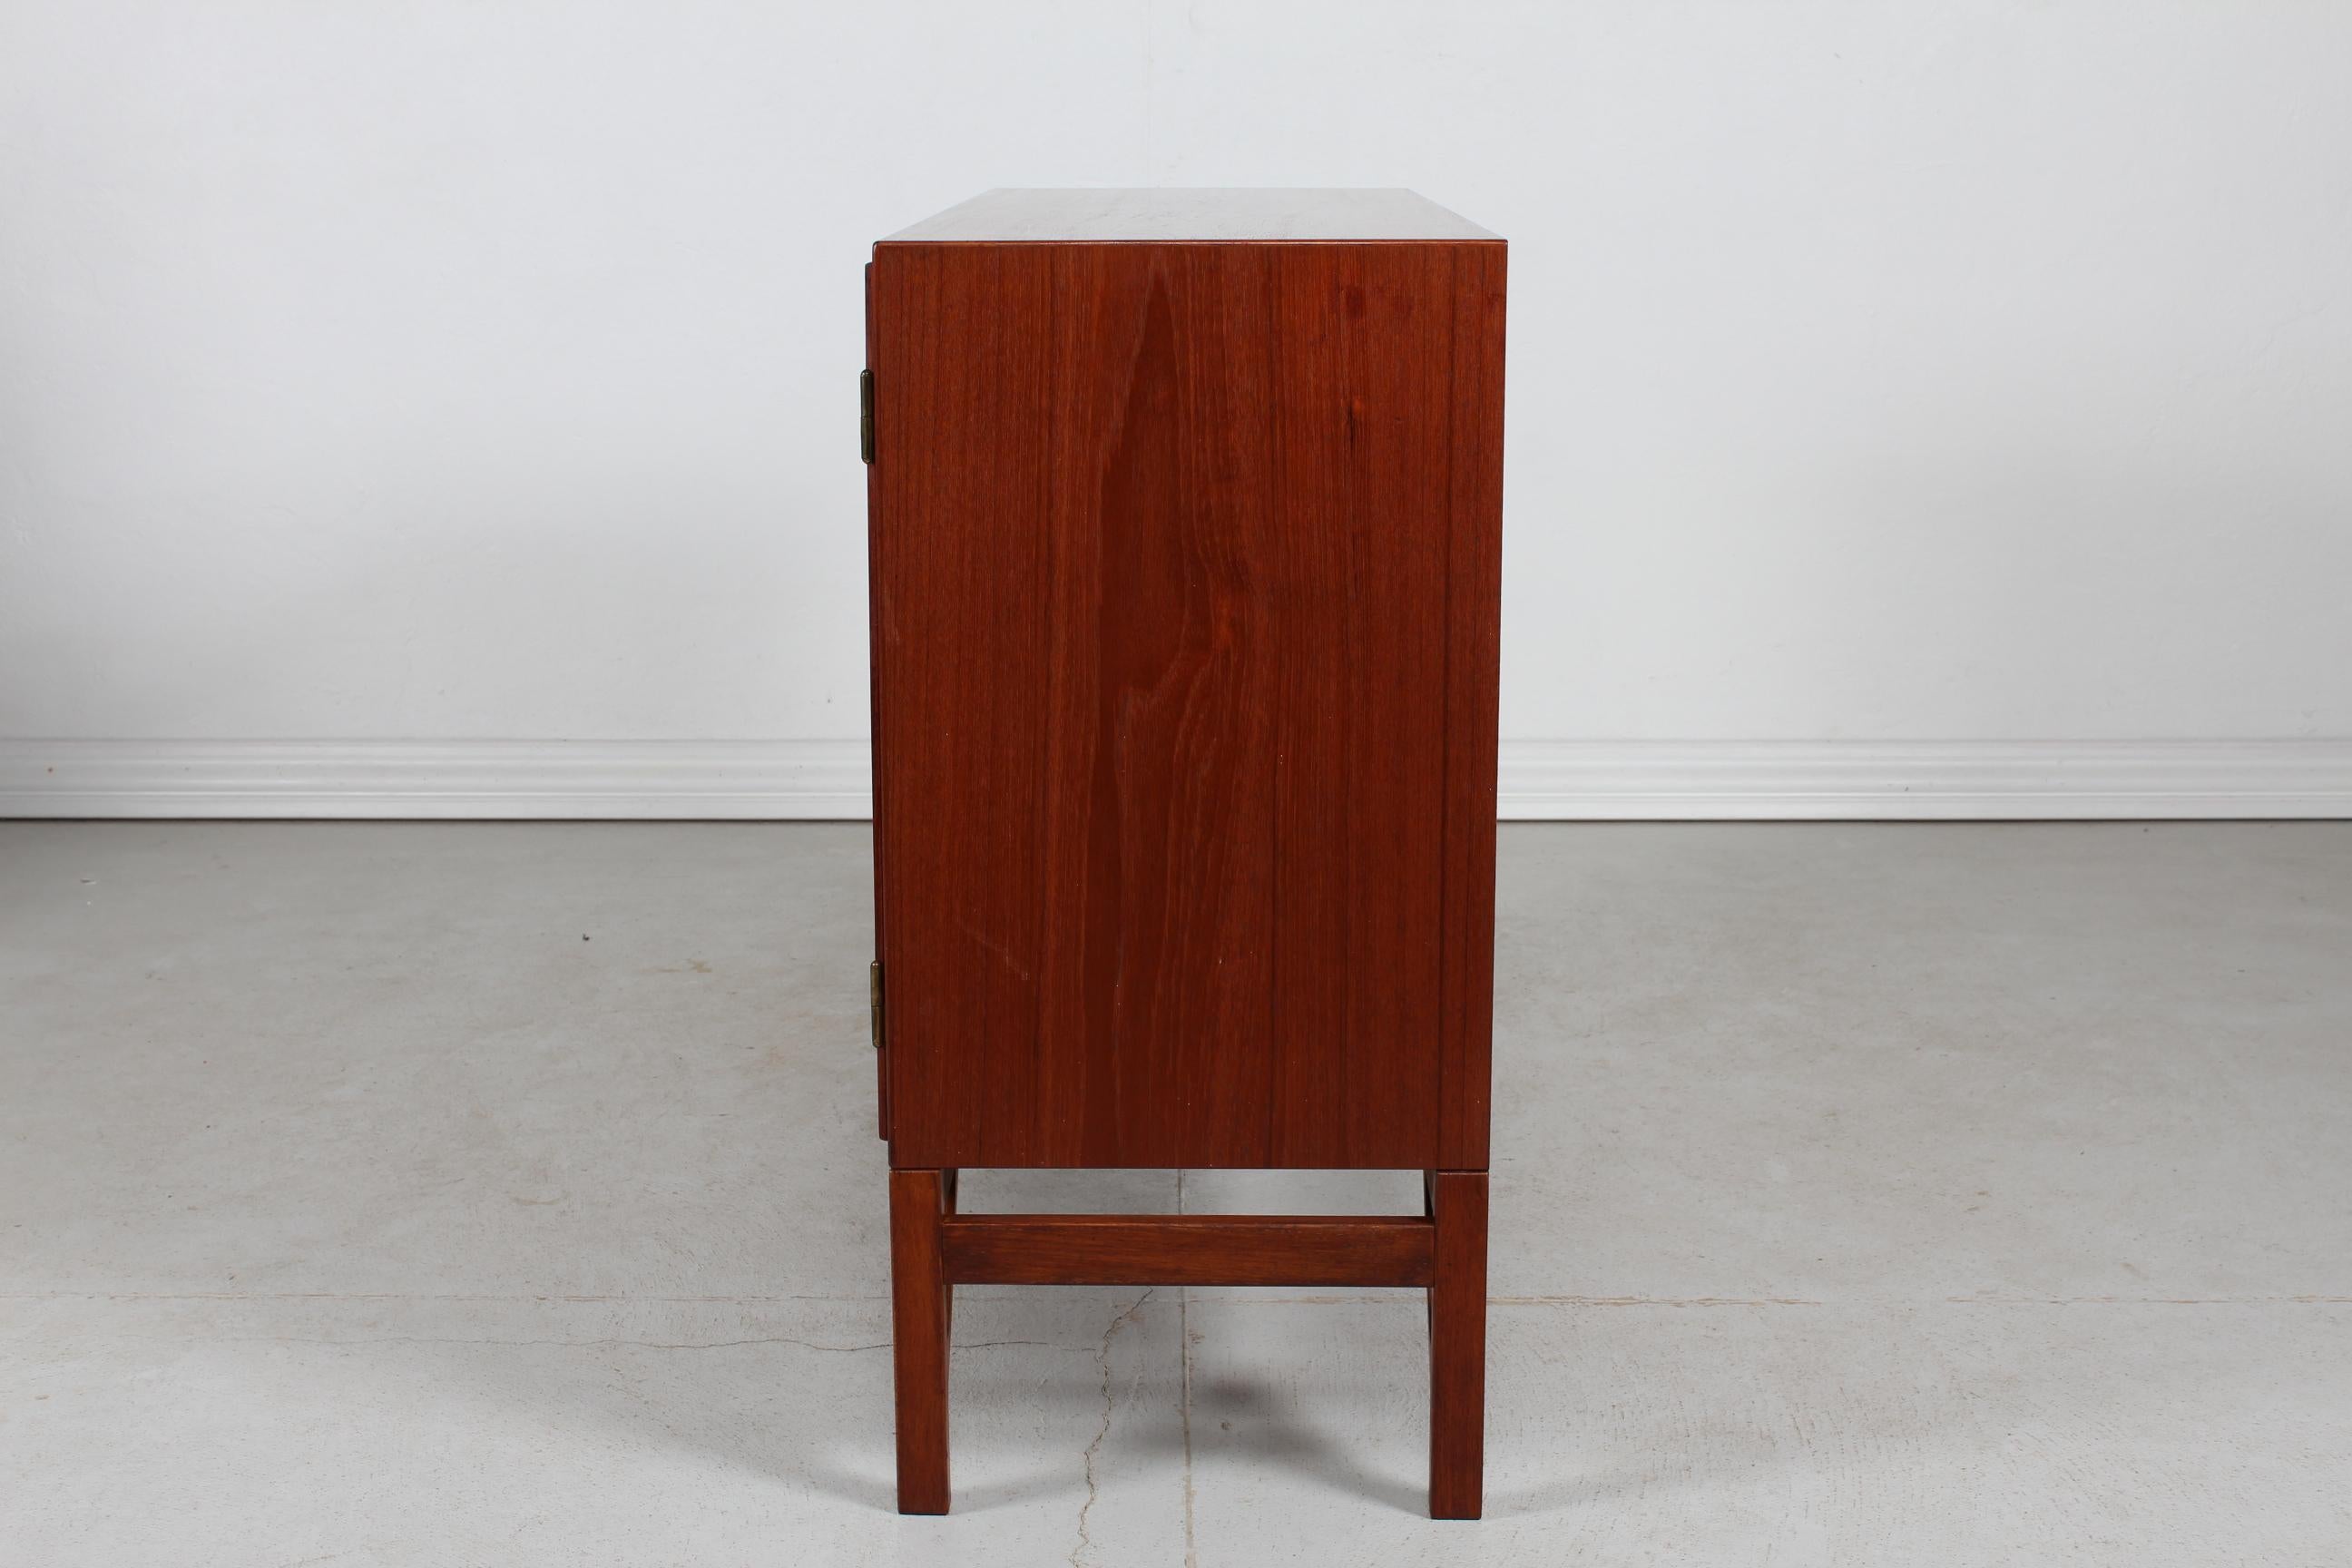 Mid-20th Century Børge Mogensen Teak Sideboard with China Legs of Oak Made for FDB Møbler 1960s For Sale